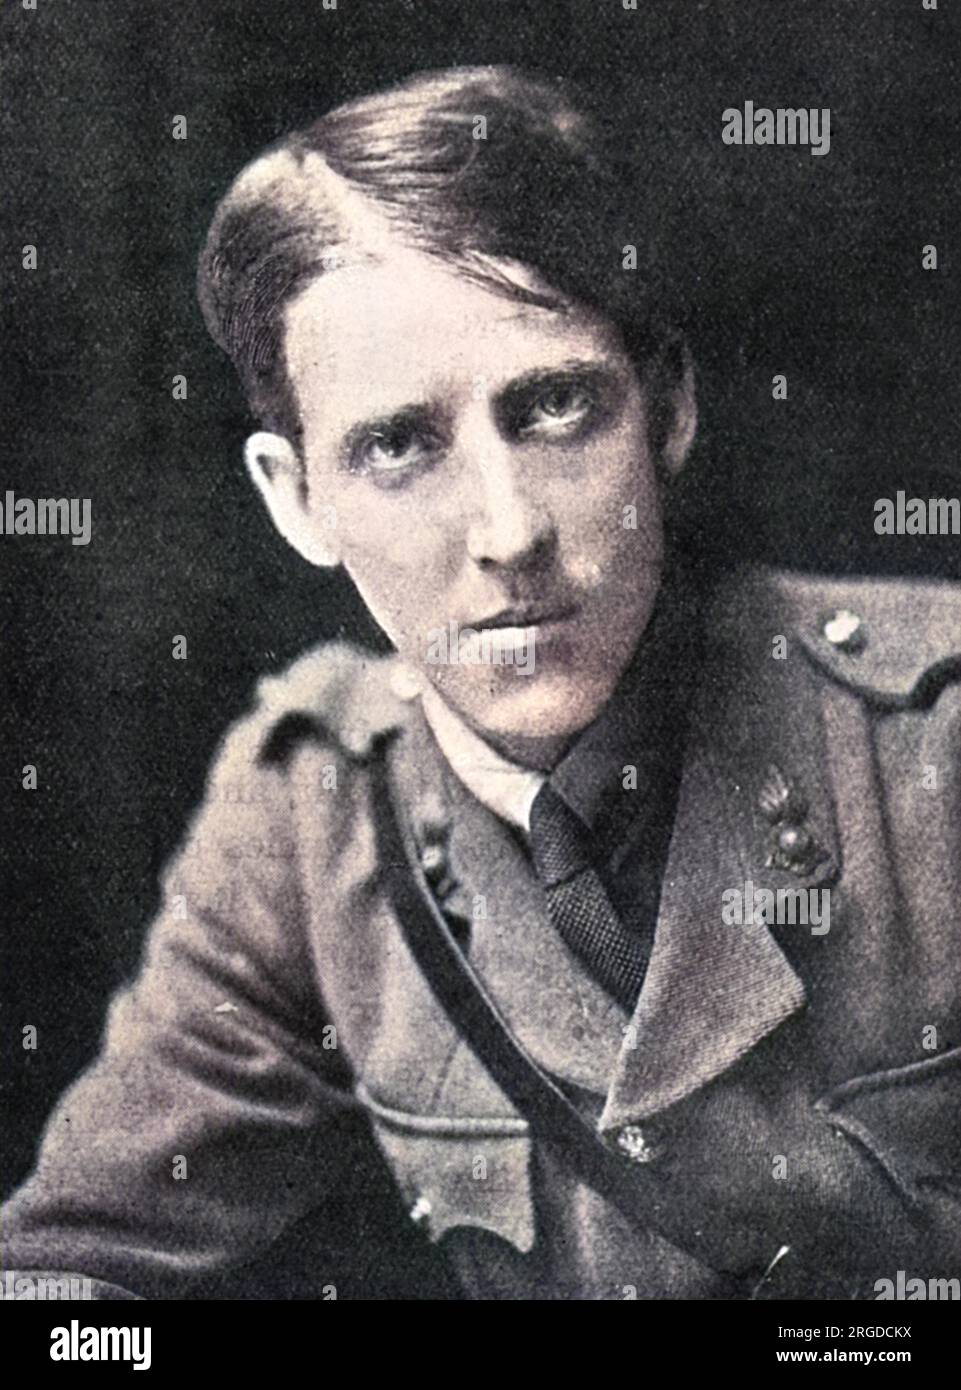 JACK COLLINGS SQUIRE writer and editor, noted for his parodies and pastiches : here as a soldier in World War One. Stock Photo